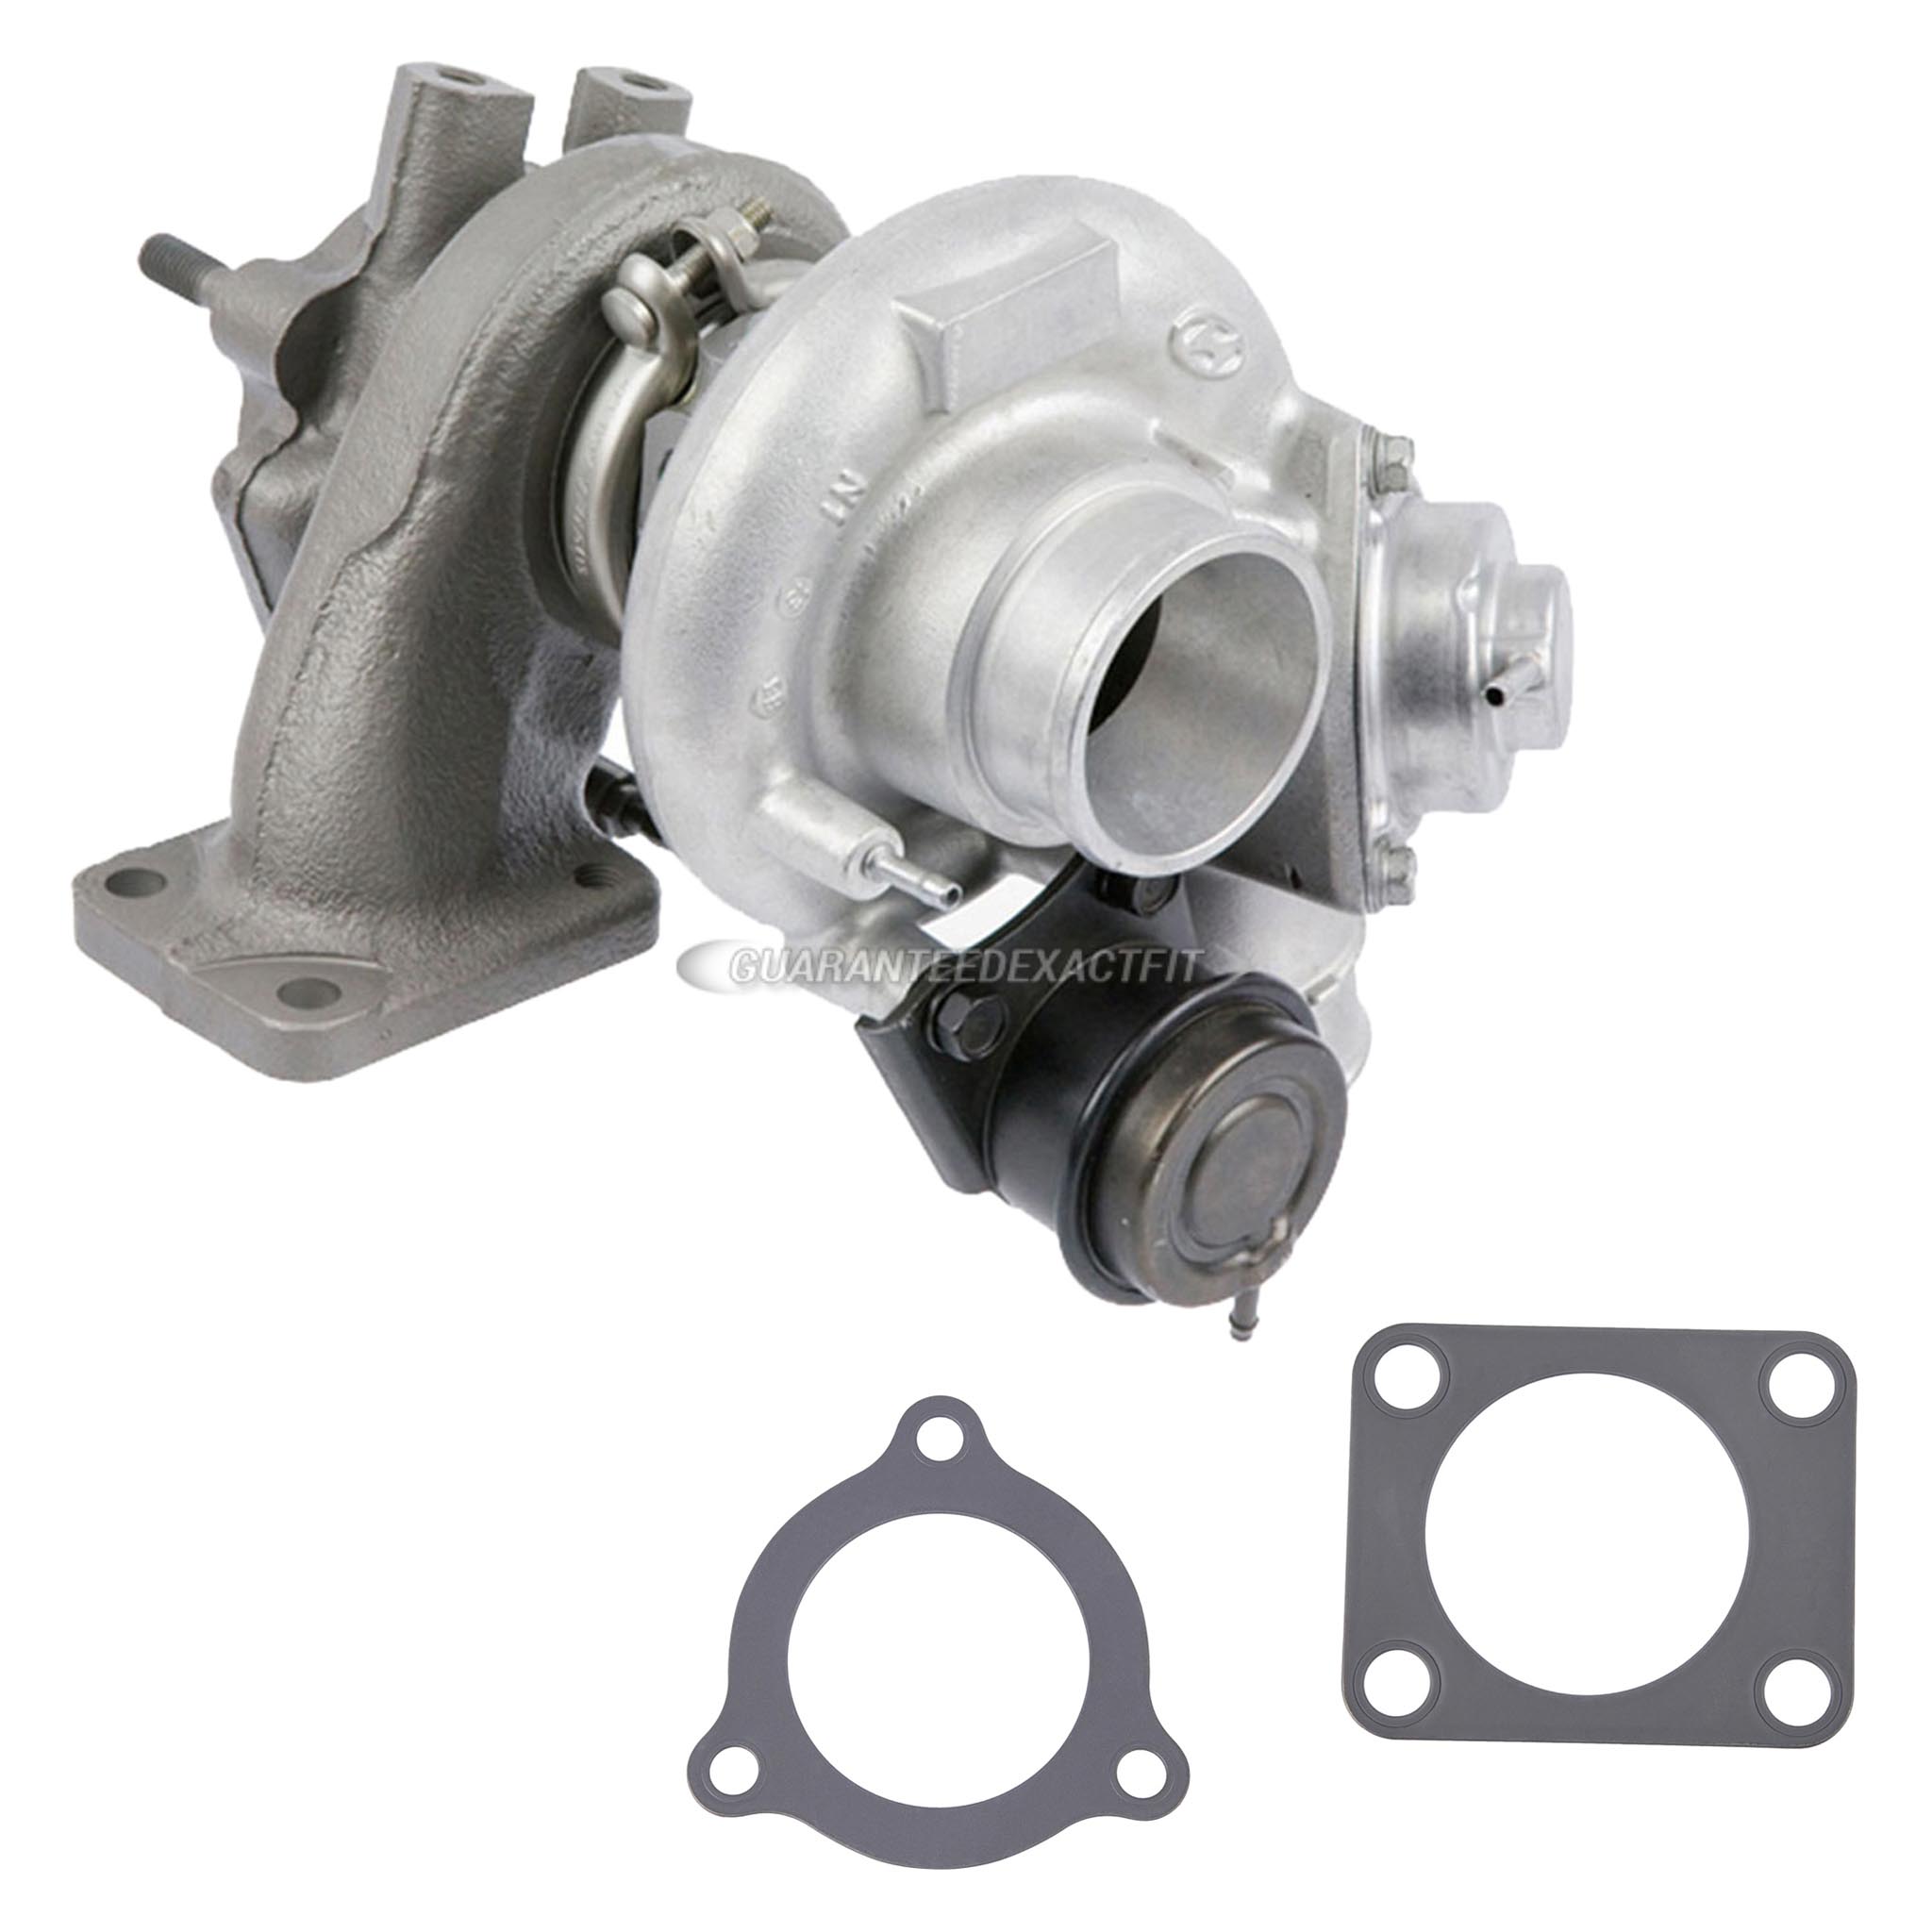 2012 Hyundai genesis coupe turbocharger and installation accessory kit 